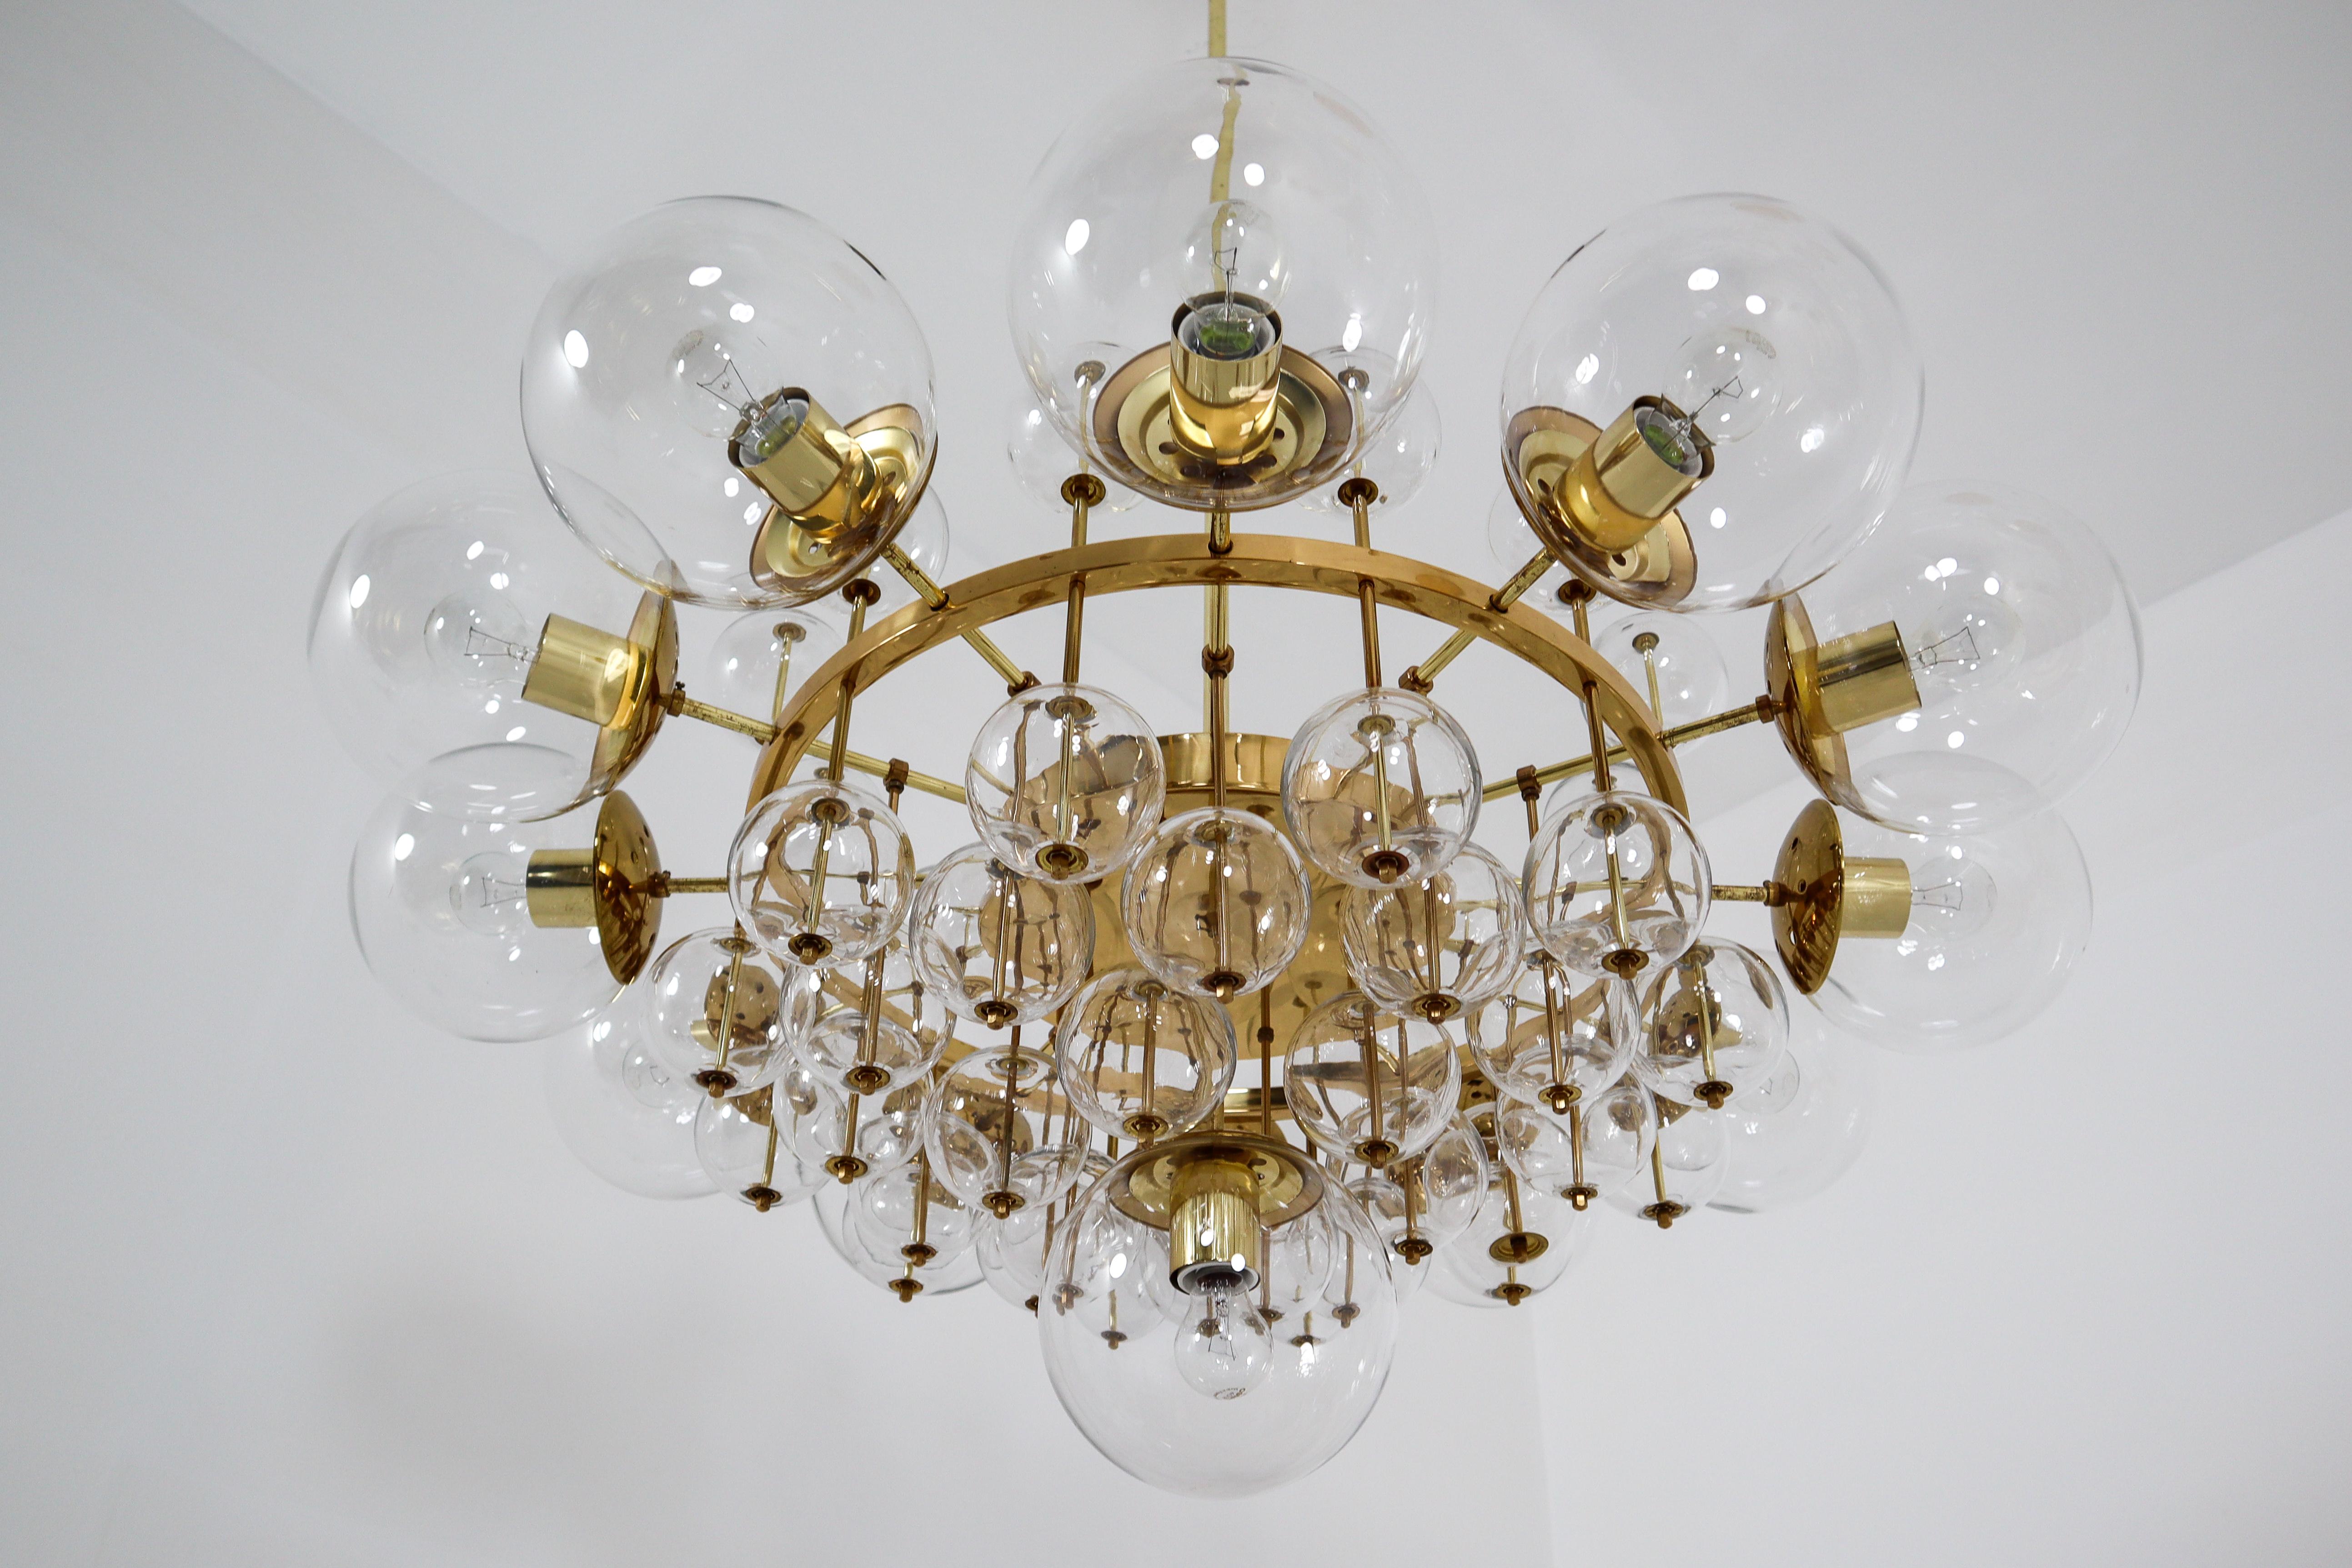 Midcentury Hotel Chandelier with Brass Fixture and Hand-Blowed Glass Globes 1